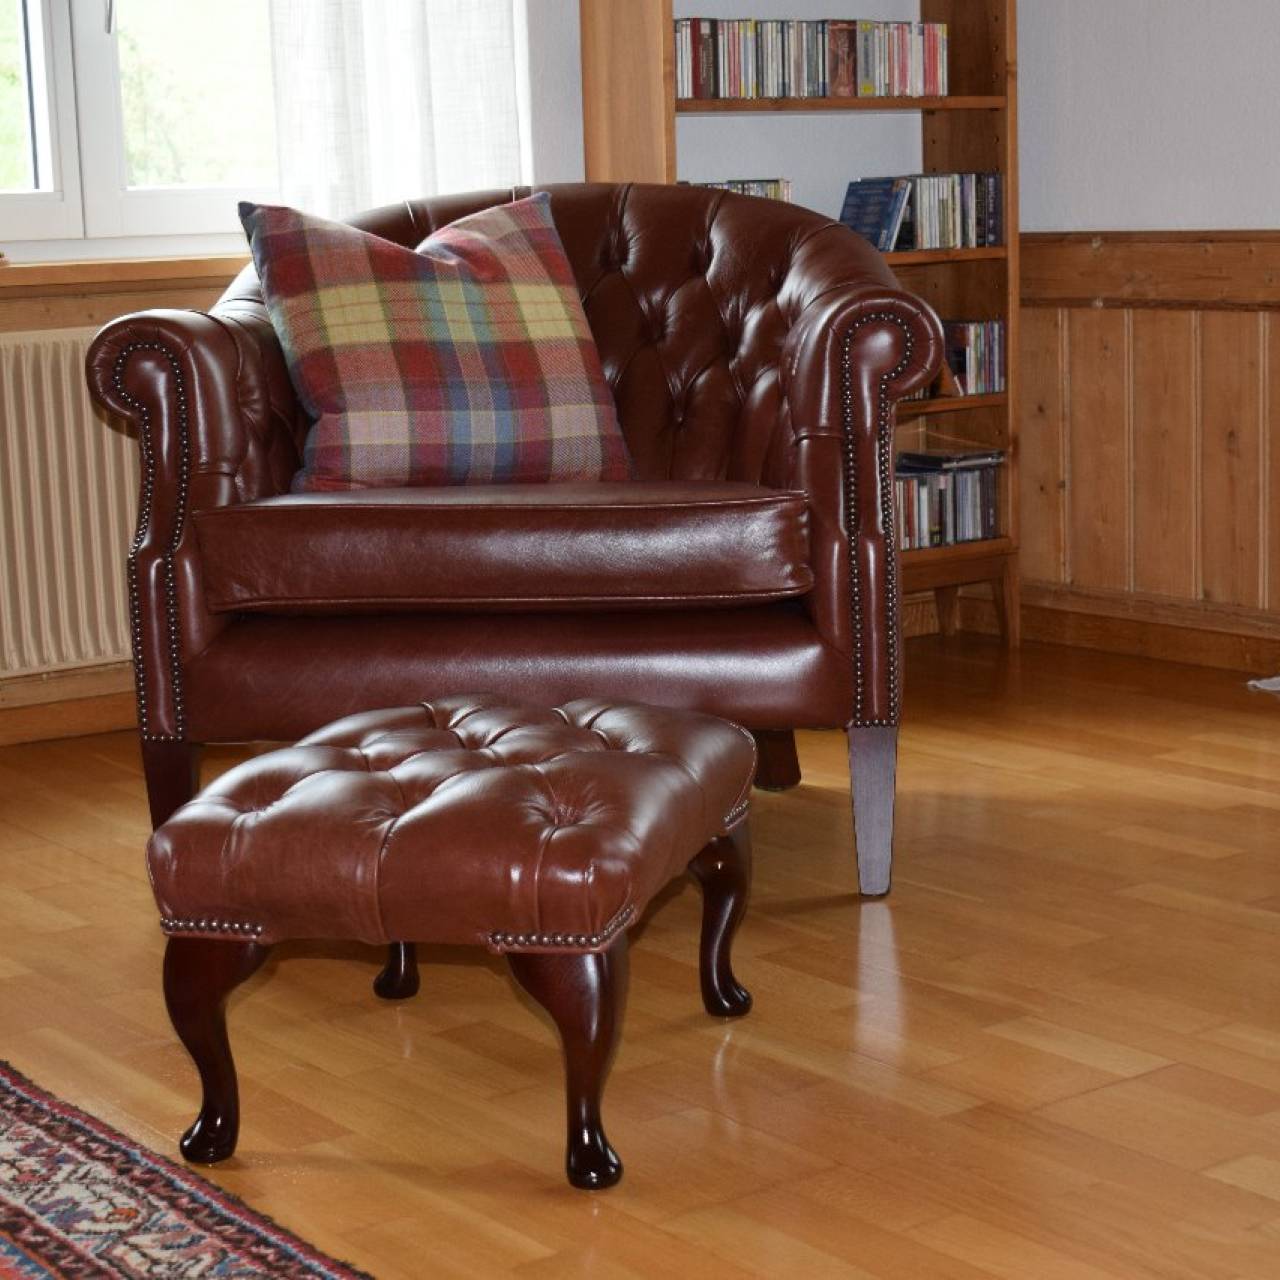 Special Chesterfield Shelly Tub Chair in Old English Chestnut